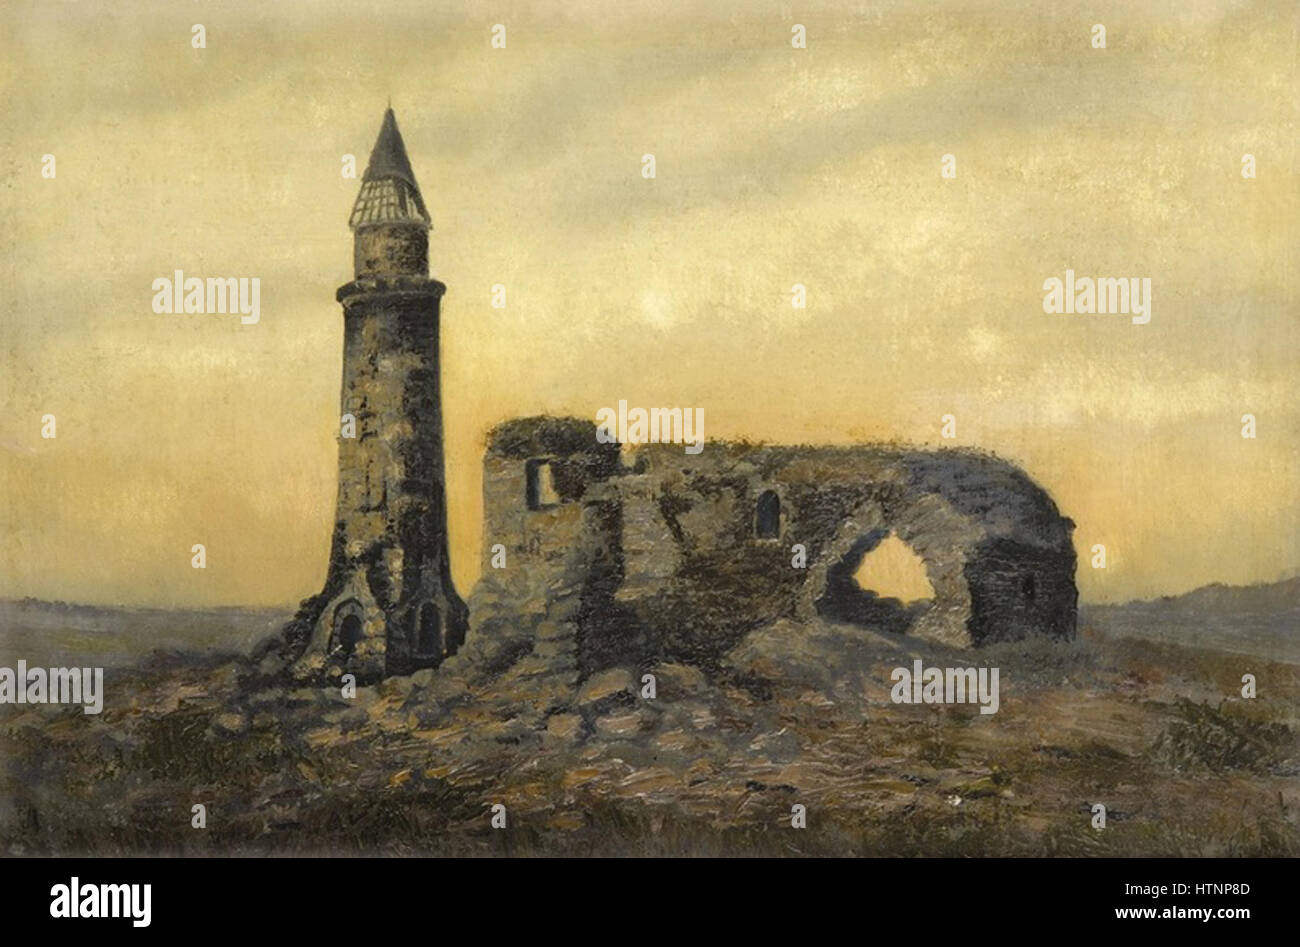 The Ruins of the Khan's Tomb and the Small Minaret in Bulgaria (Shishkin) Stock Photo